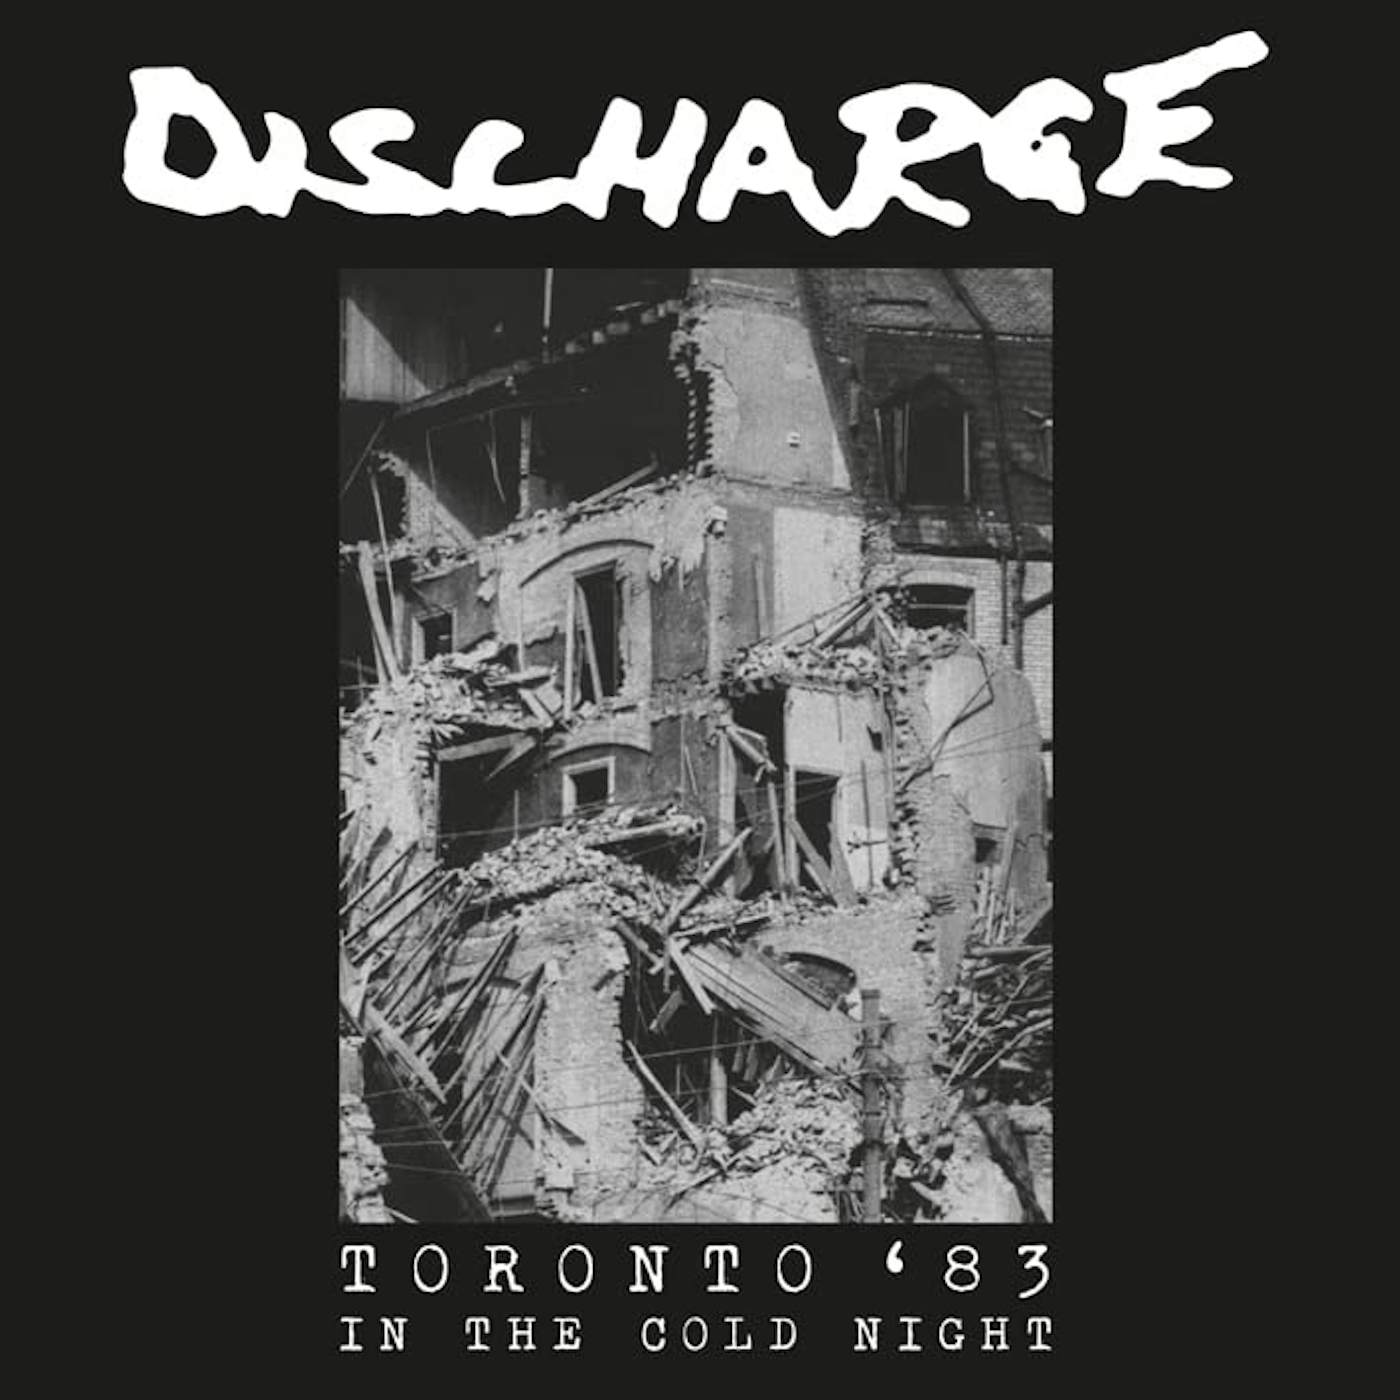 Discharge IN THE COLD NIGHT - TORONTO 1983 Vinyl Record